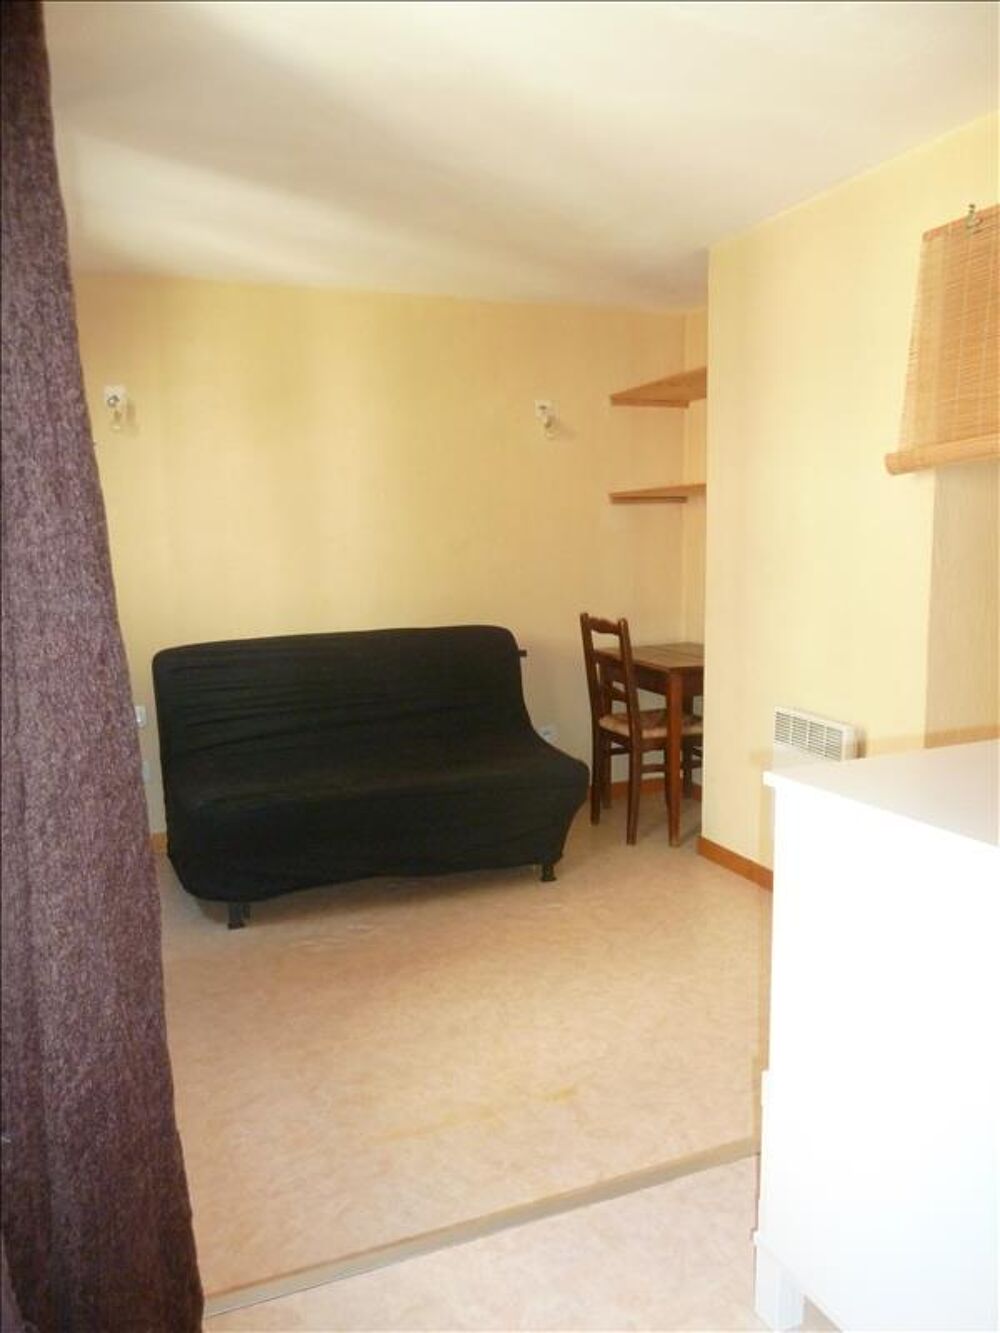 location Appartement - 1 pice(s) - 23 m Chambry (73000)